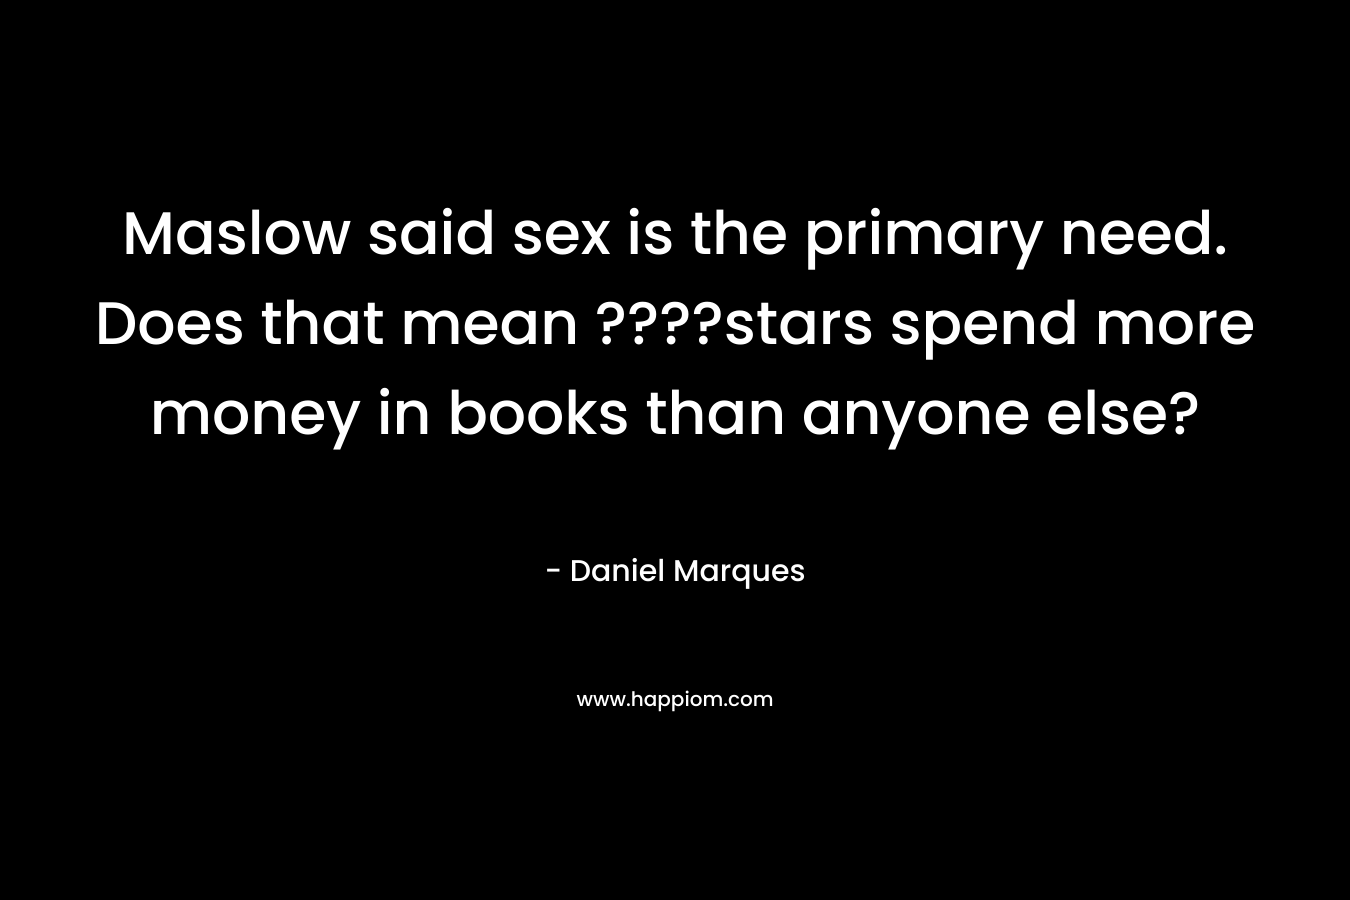 Maslow said sex is the primary need. Does that mean ????stars spend more money in books than anyone else?